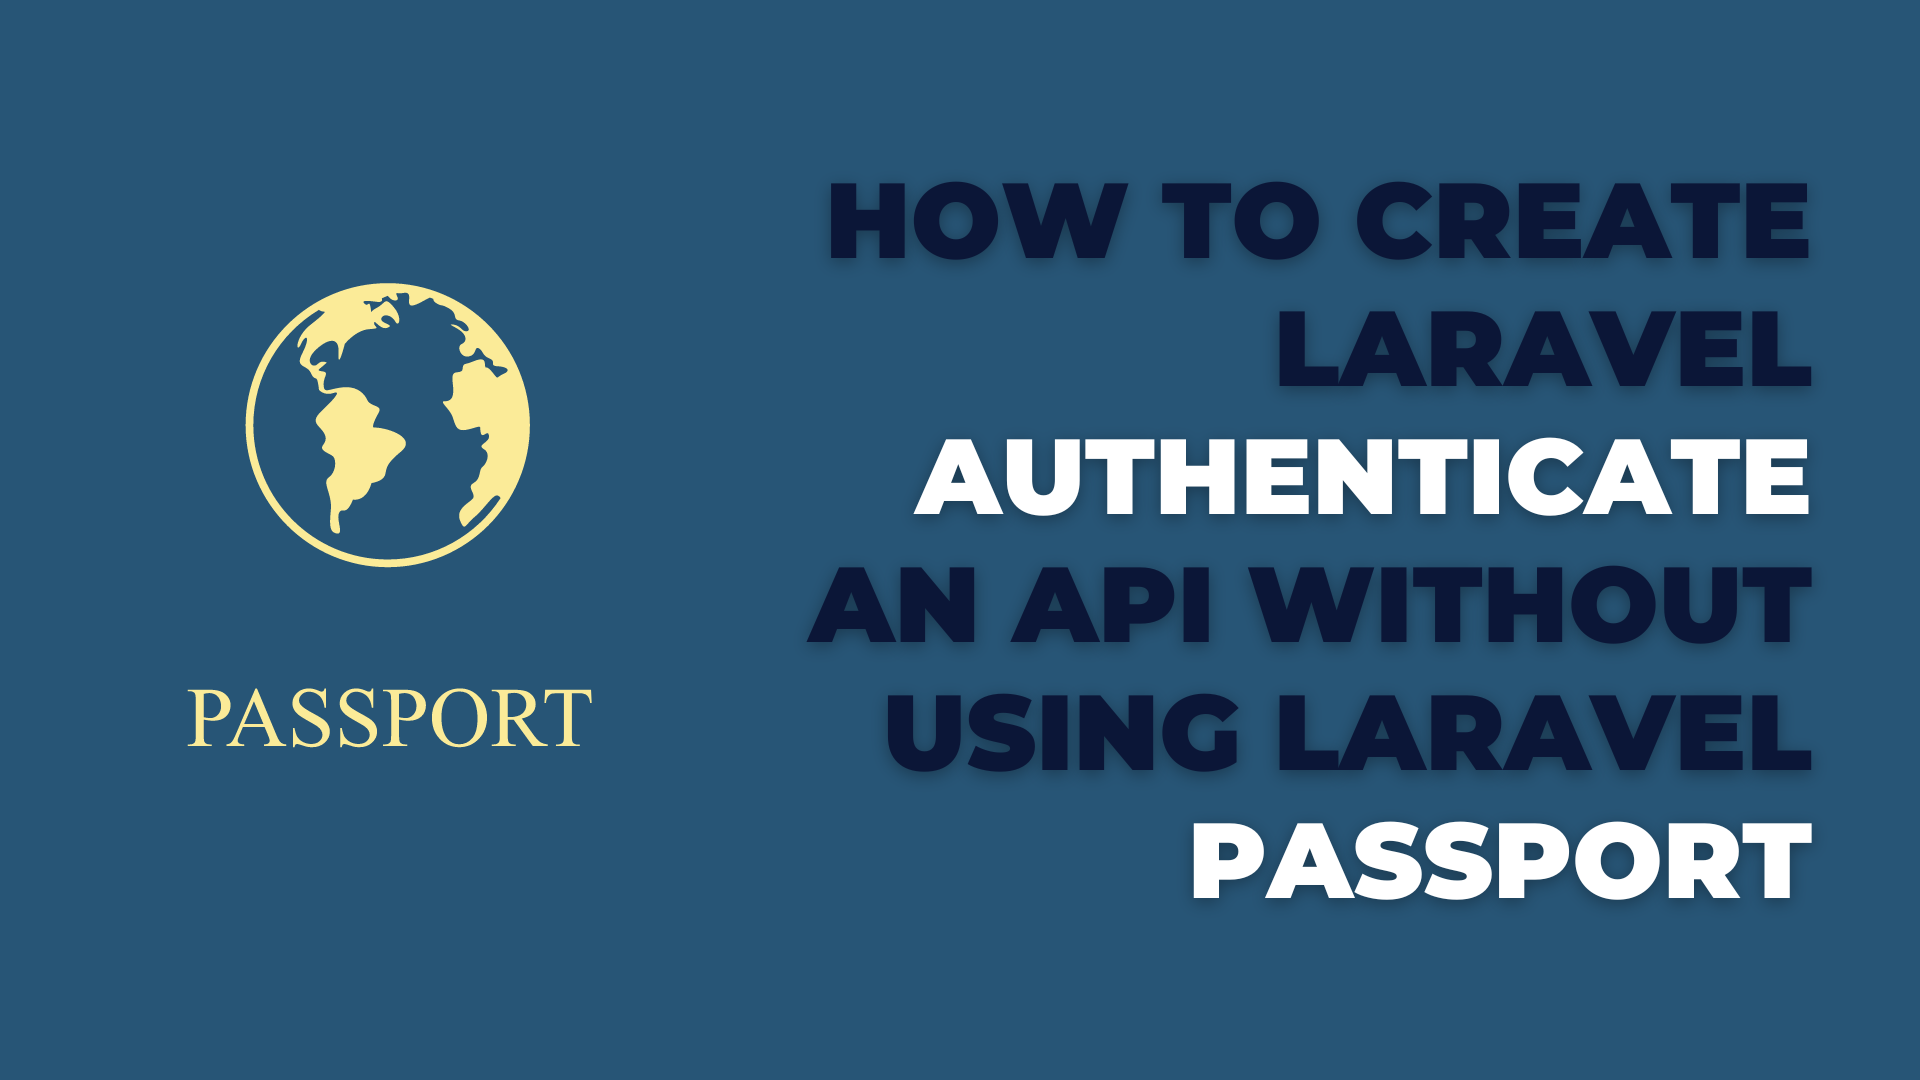 How to create Laravel authenticate an API without using Laravel Passport